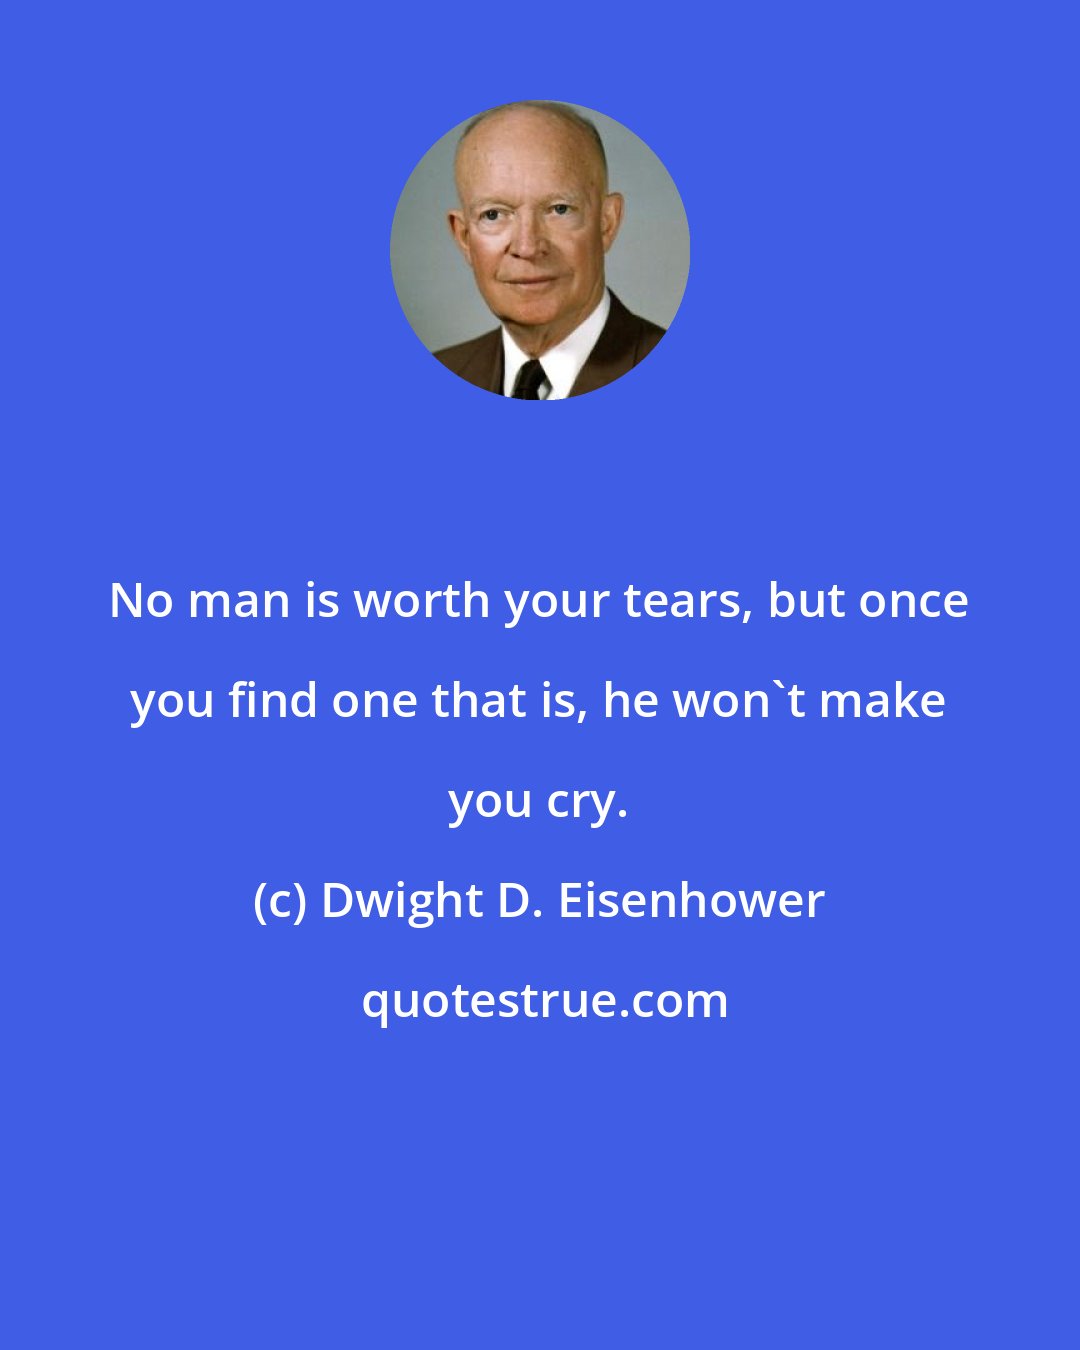 Dwight D. Eisenhower: No man is worth your tears, but once you find one that is, he won't make you cry.